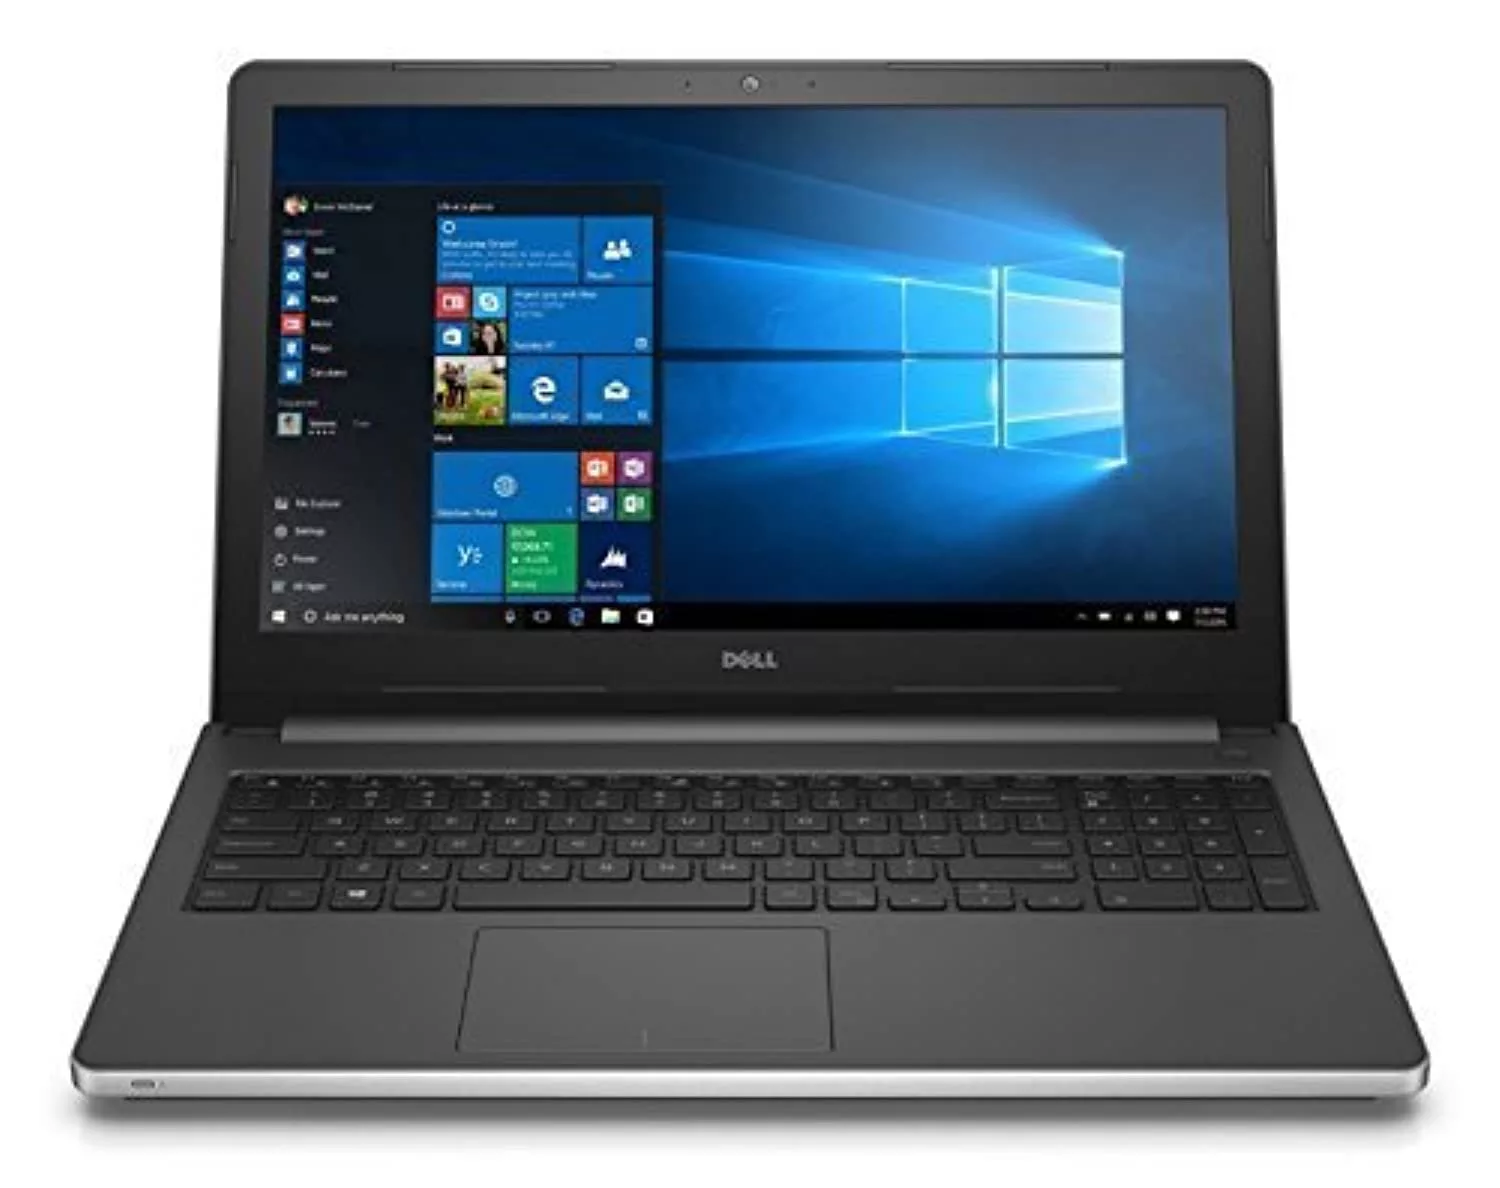 The Best Dell Laptop for Home